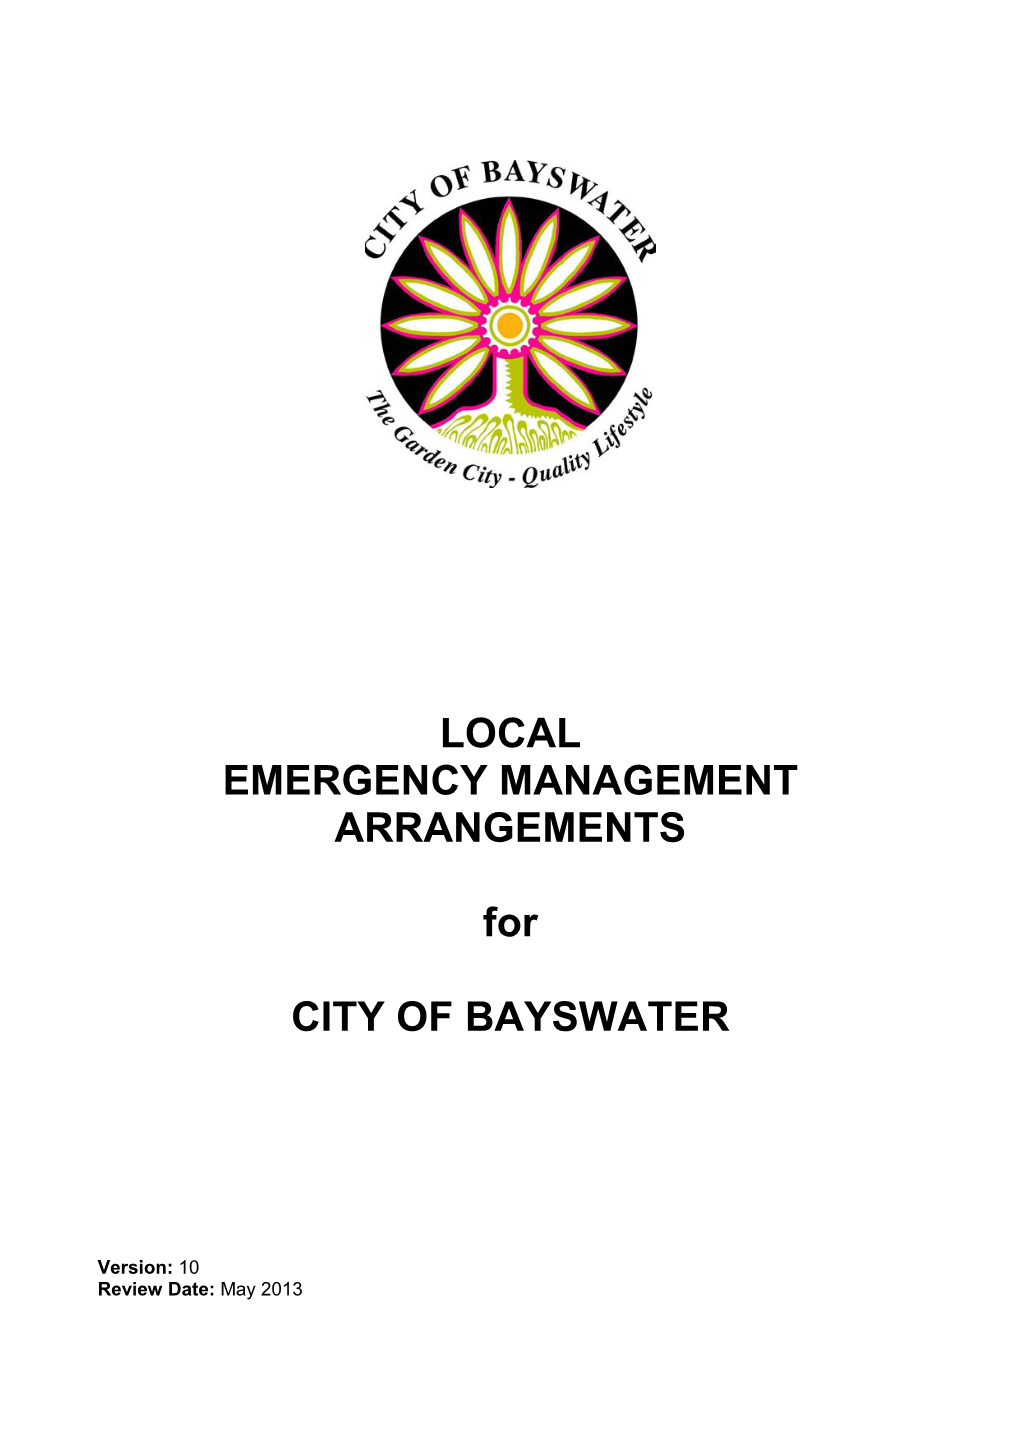 LOCAL EMERGENCY MANAGEMENT ARRANGEMENTS for CITY of BAYSWATER